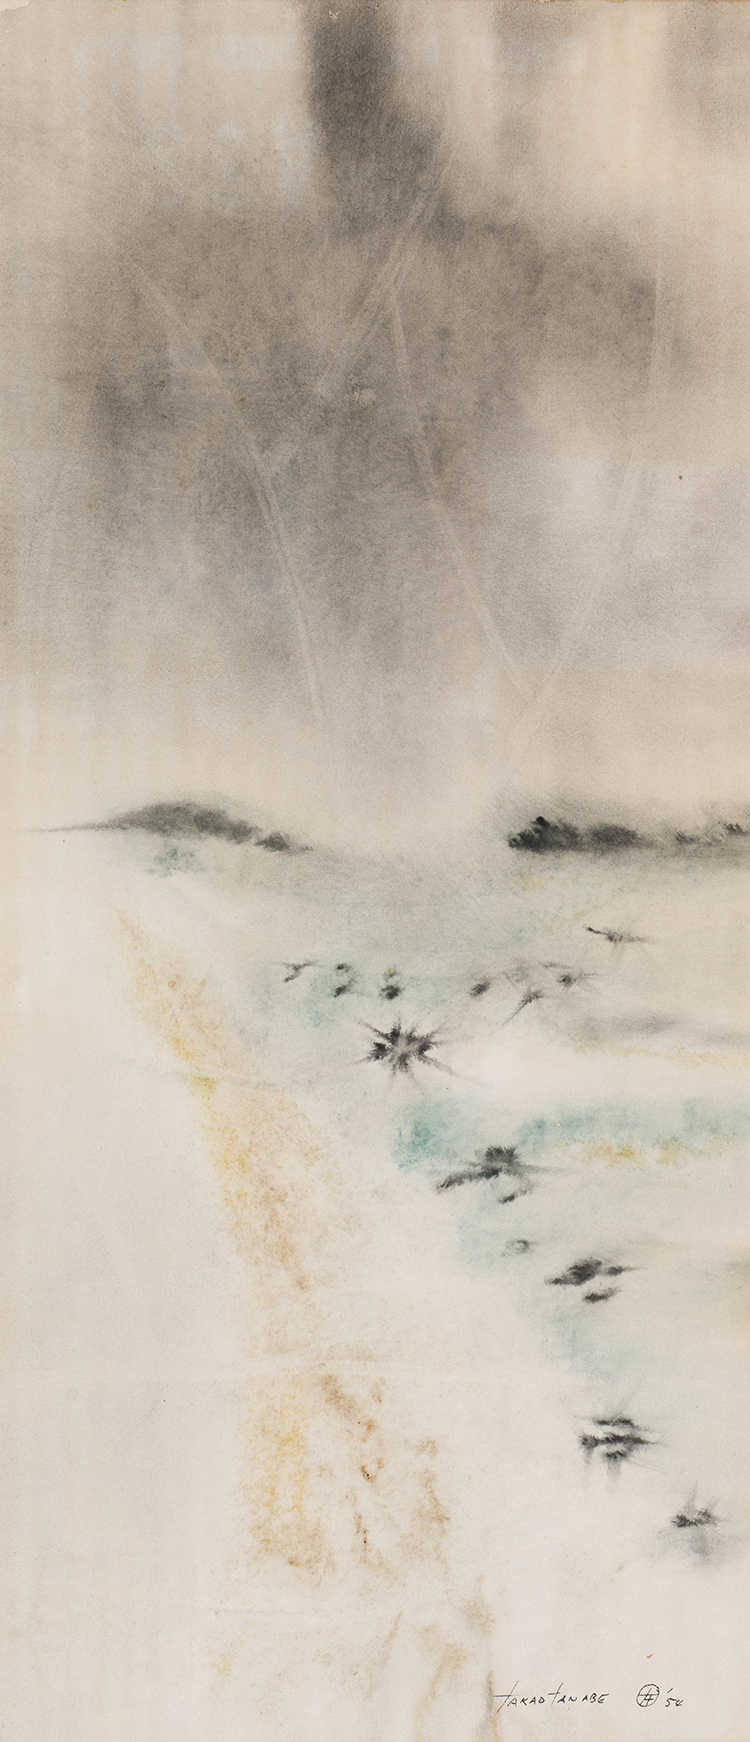 Variations on a Theme - Denmark; The Land, Beach and Sky #3 by Takao Tanabe